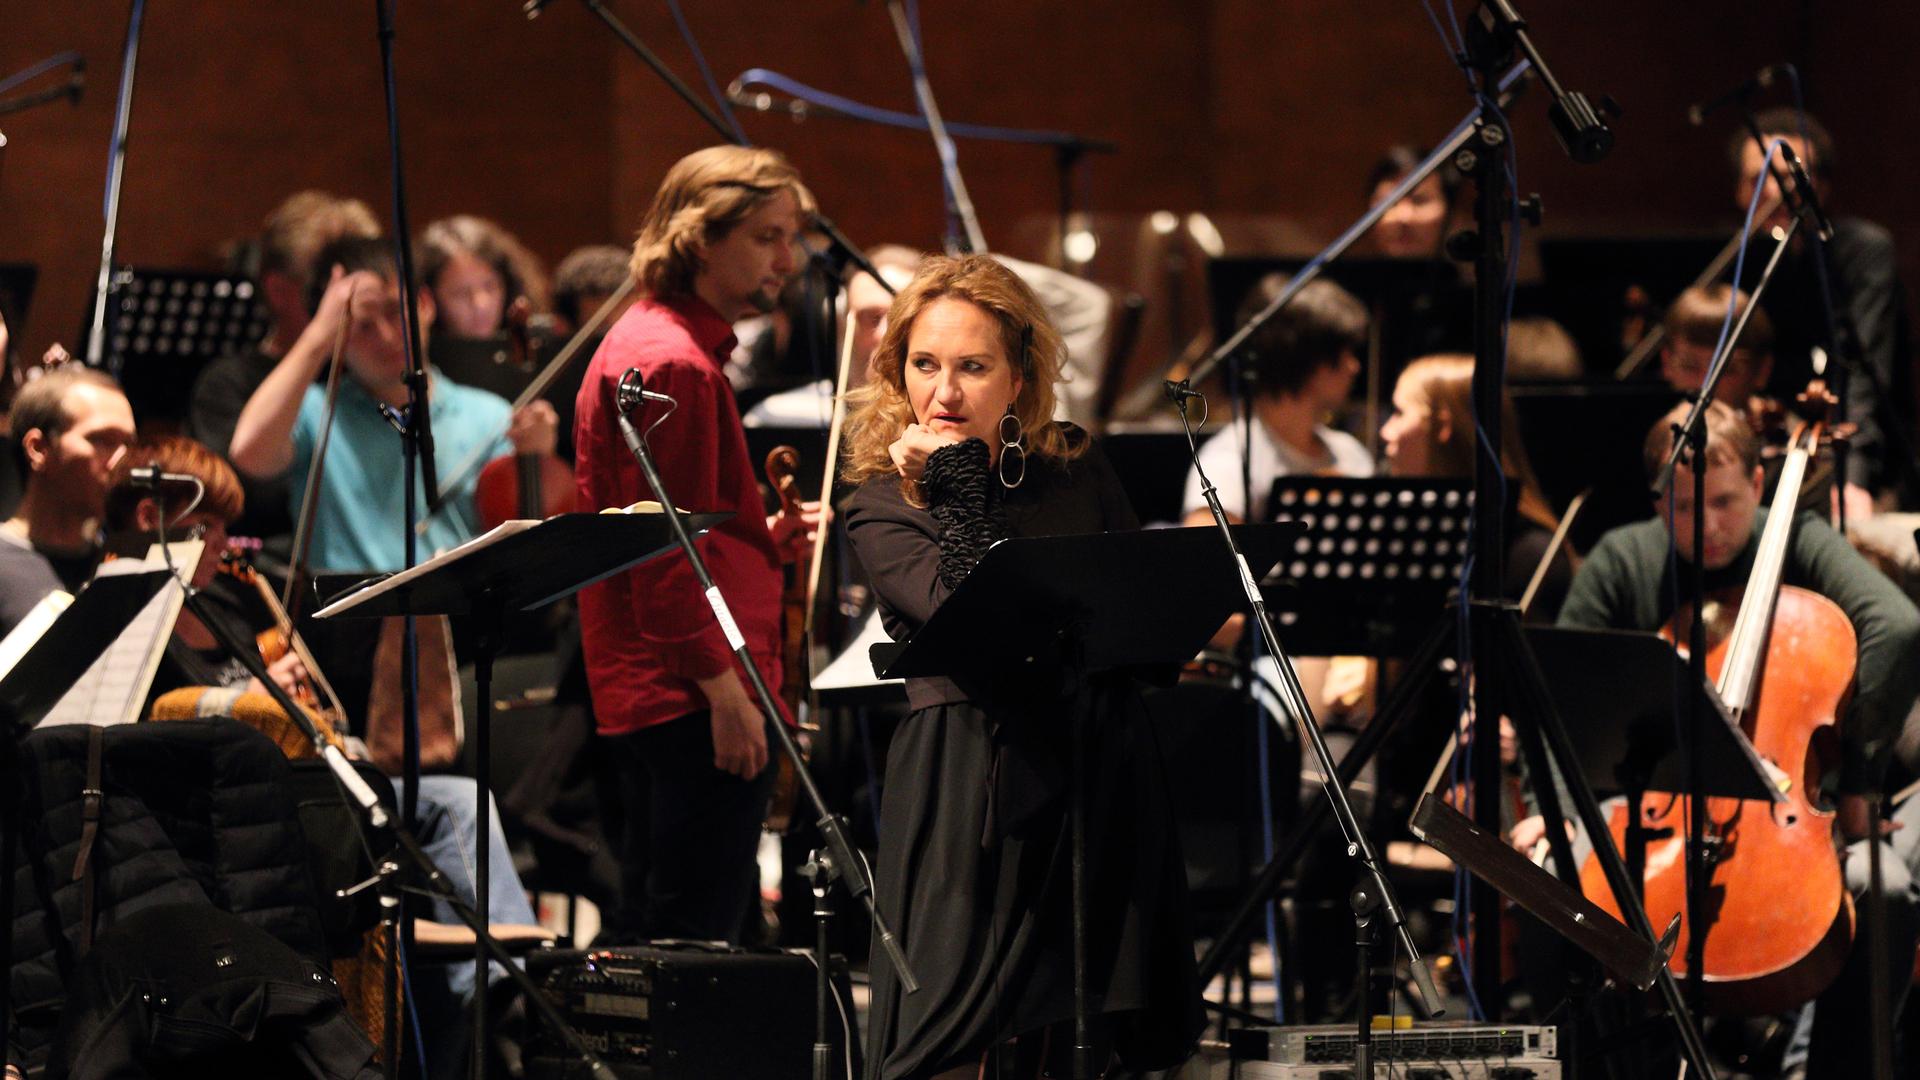 German soprano Simone Kermes on Currentzis's many takes during recording sessions: 